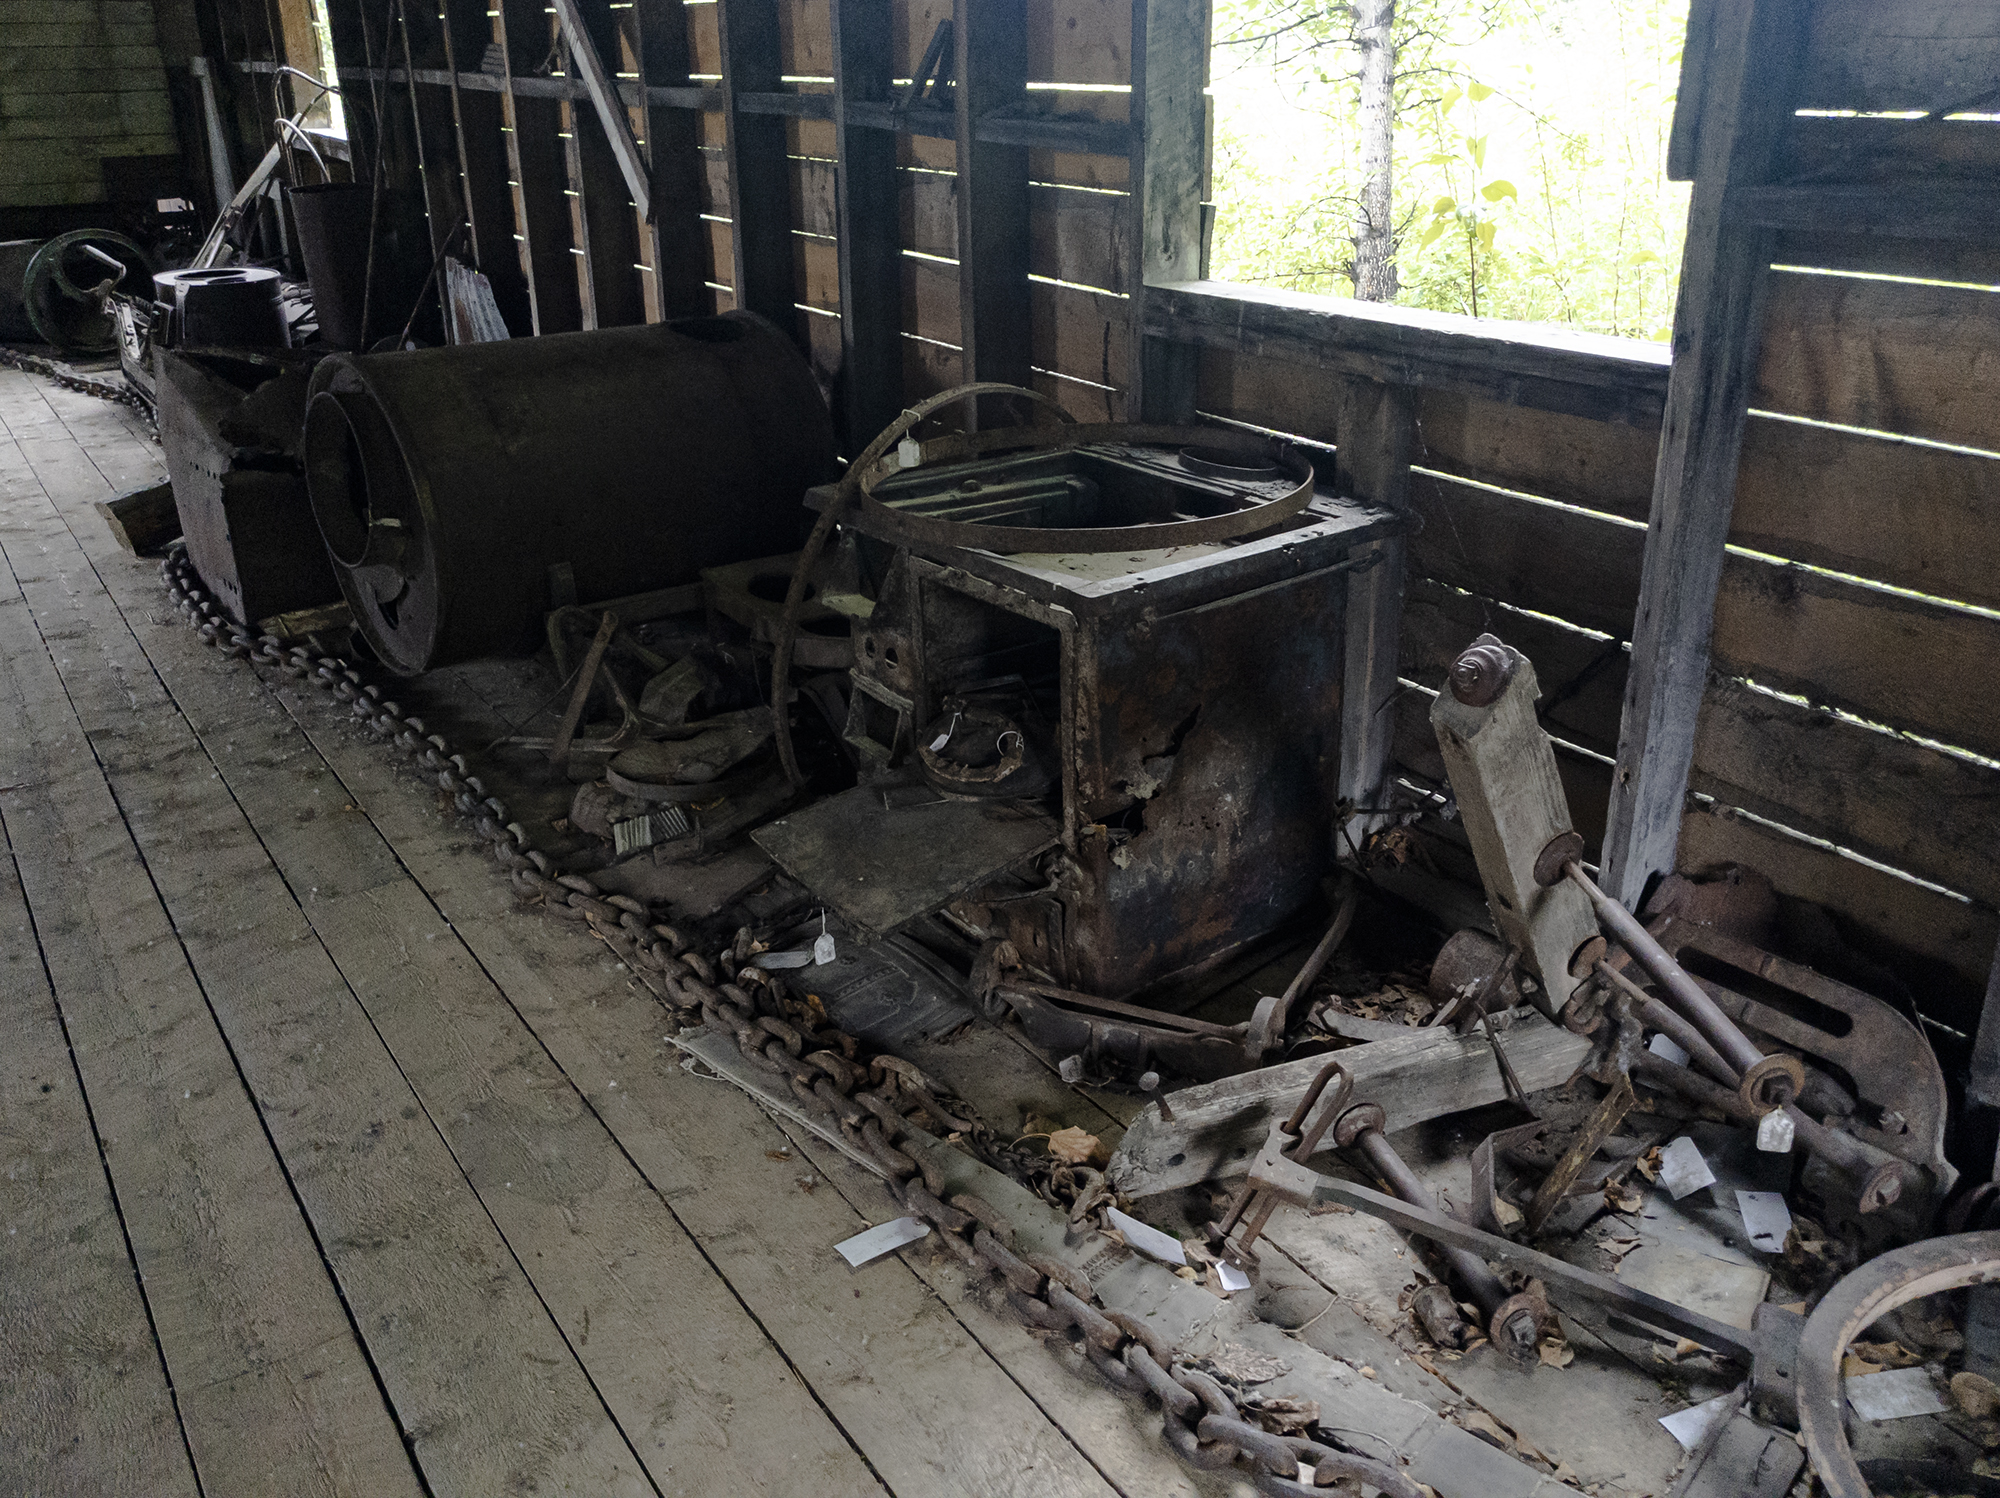 Equipment in the AC Co. store and warehouse in the Forty Mile townsite in Yukon, pictured on June 21, 2020. (Steve Silva)